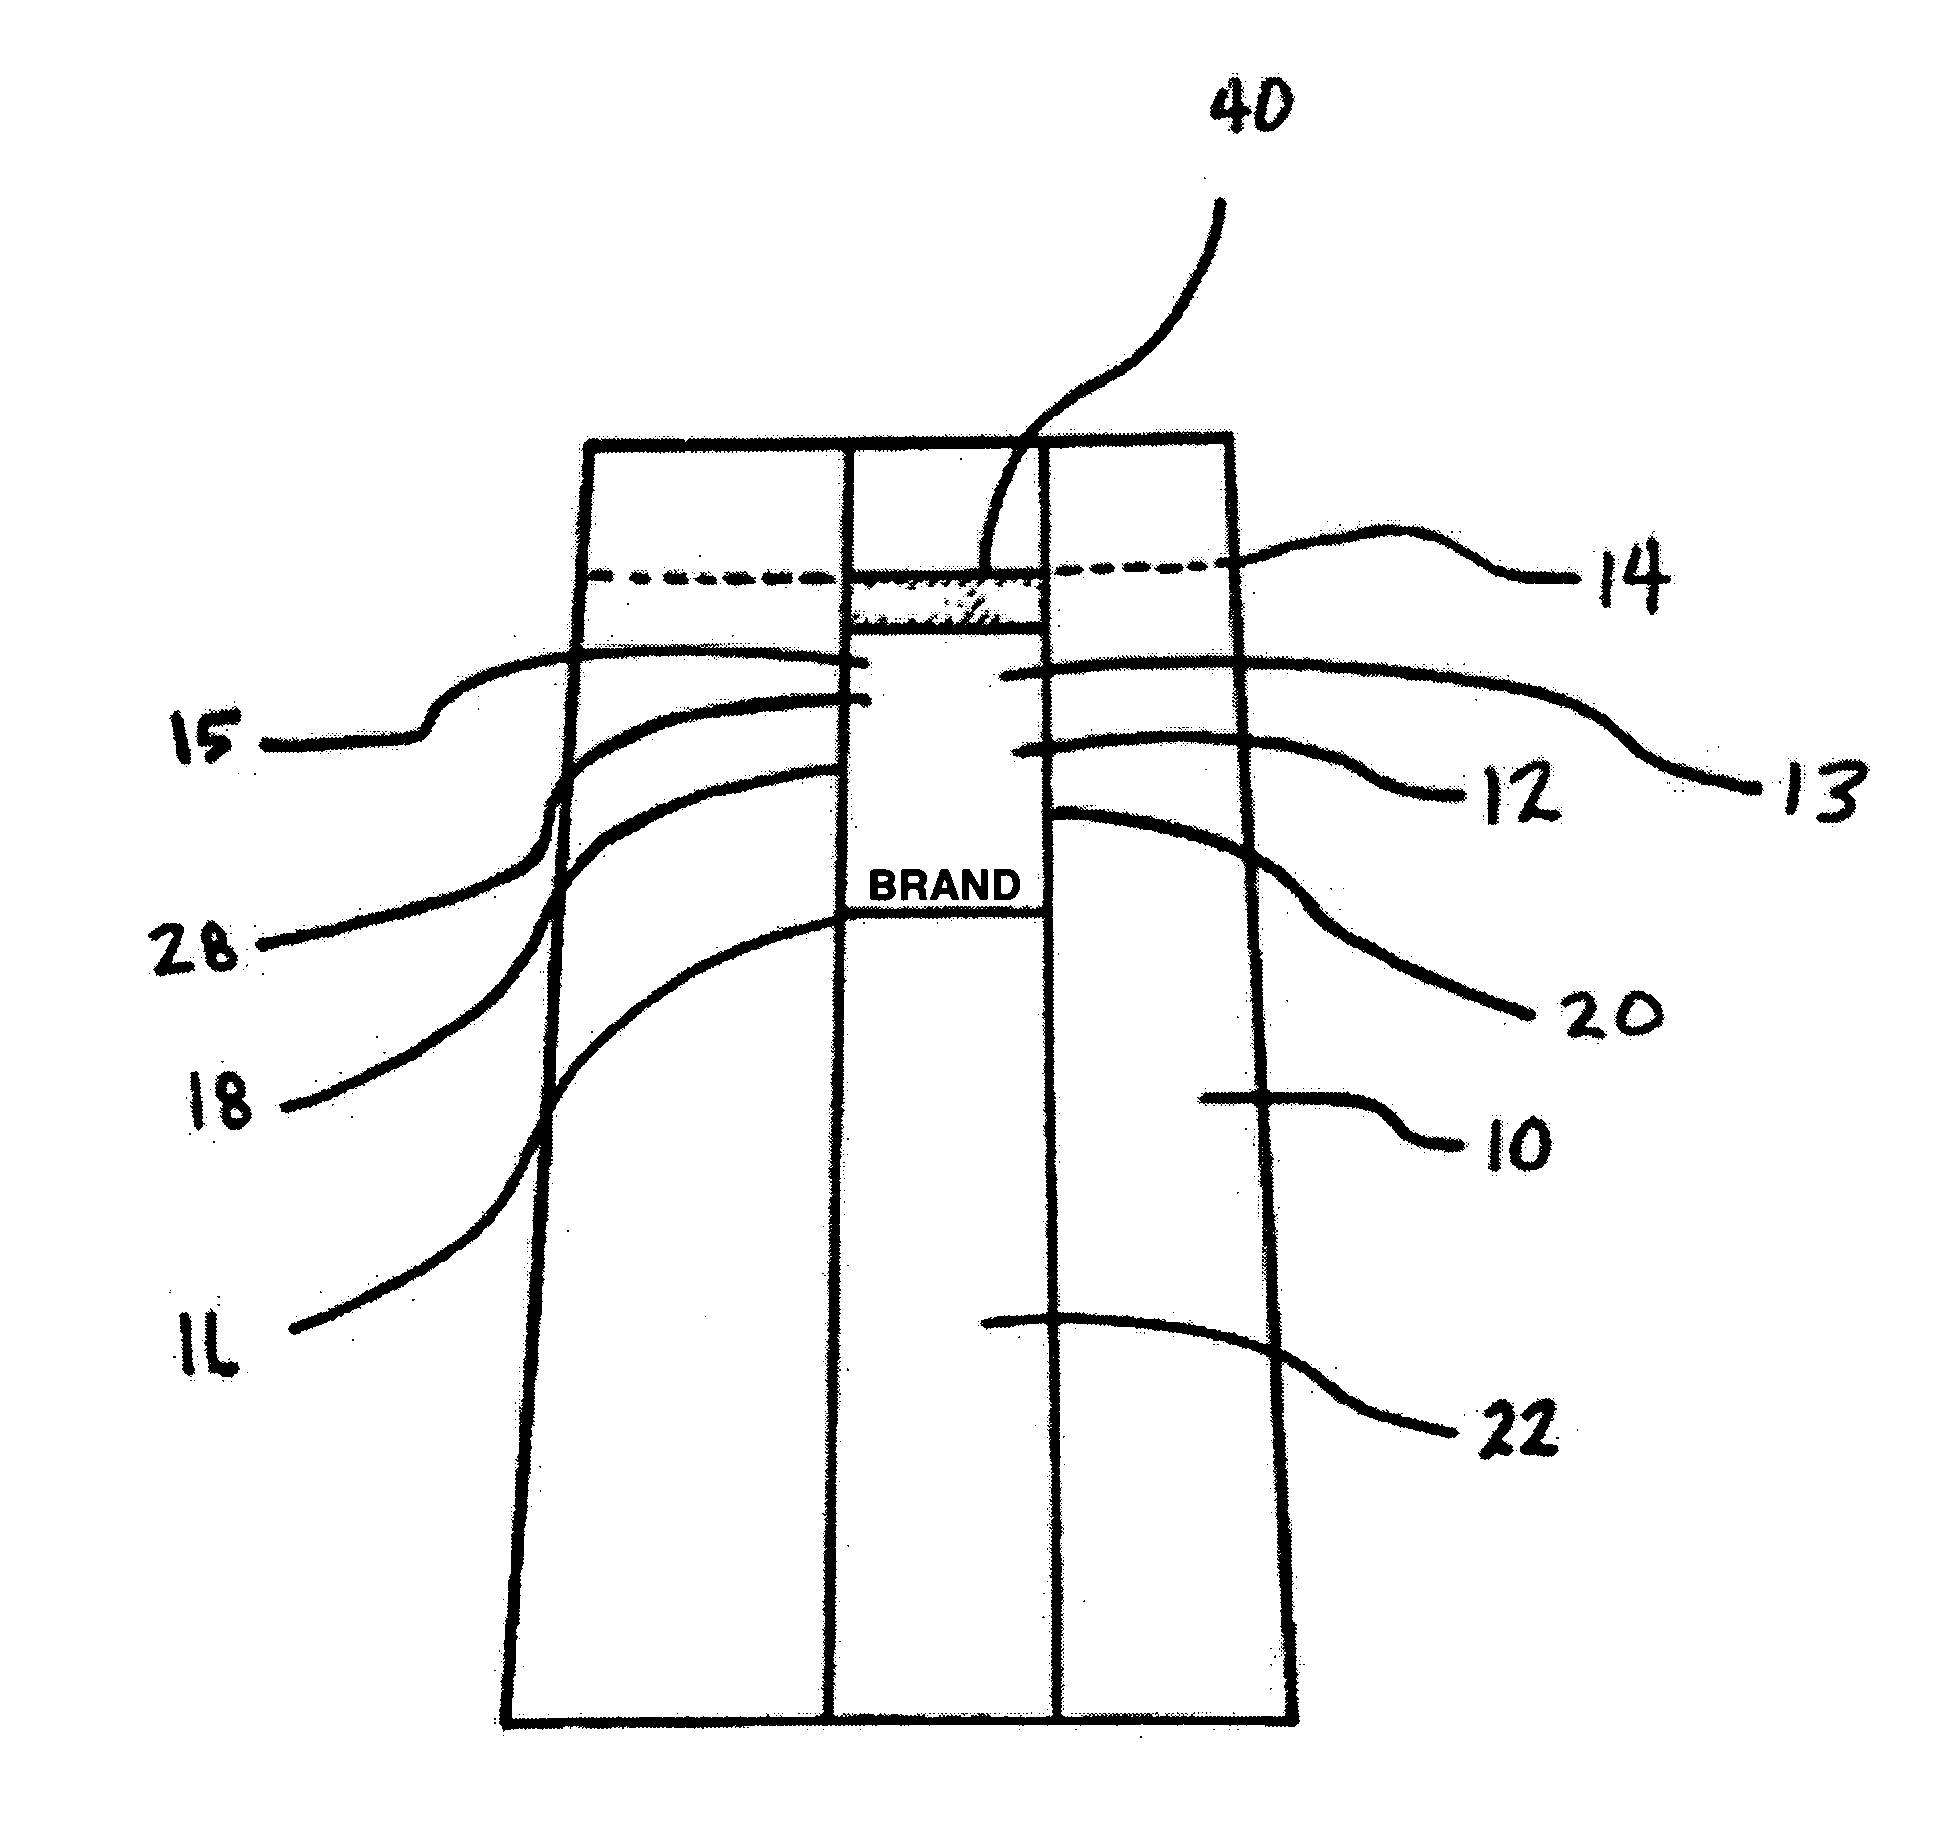 Athletic apparel with a pocket located on or near the hip region for holding a mobile device or music player